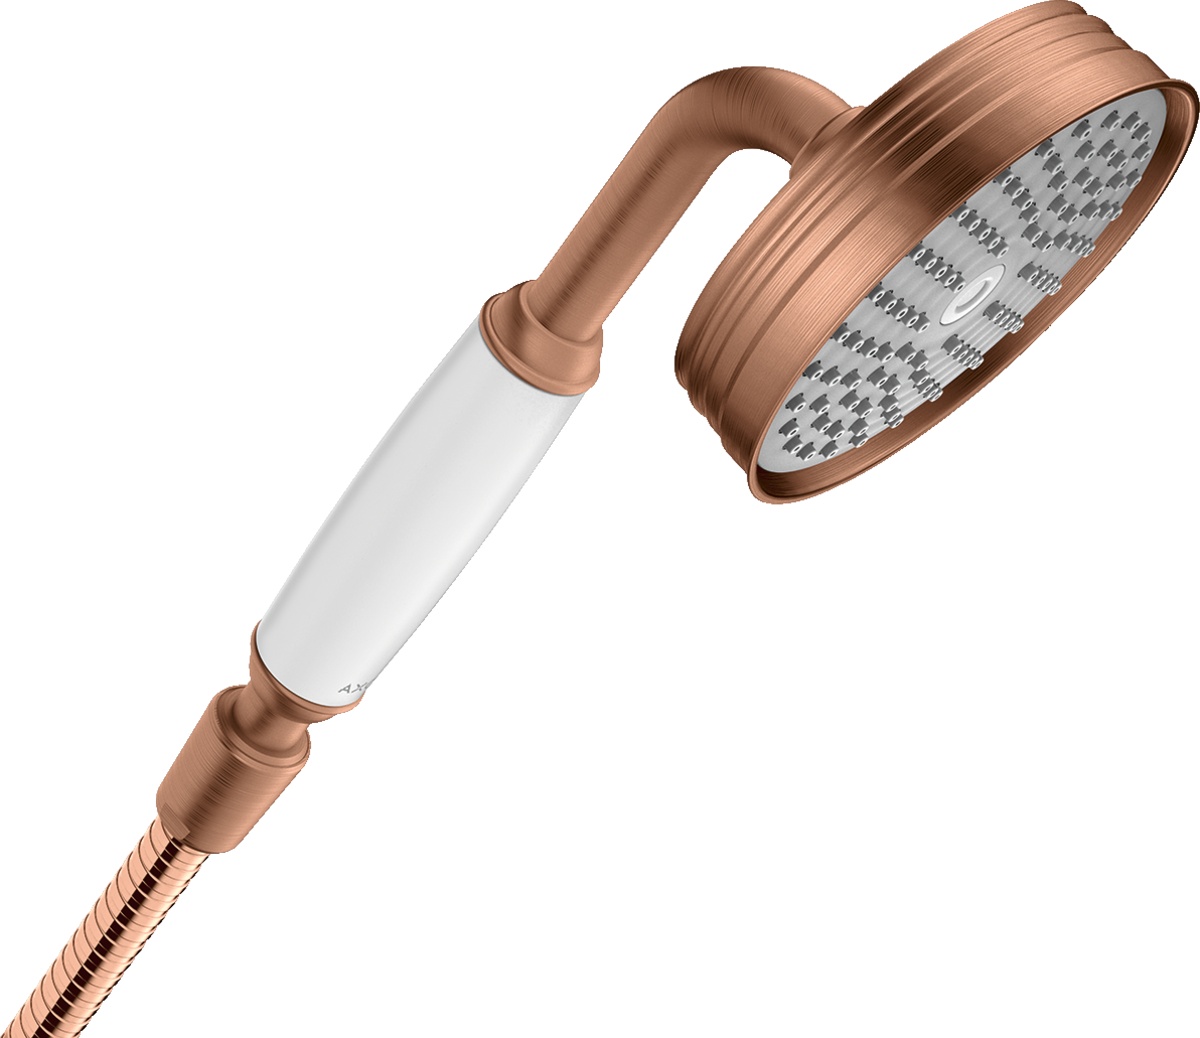 Para de dus Hansgrohe Axor Montreux 100 cu 1 jet red gold periat Hansgrohe Axor imagine 2022 by aka-home.ro